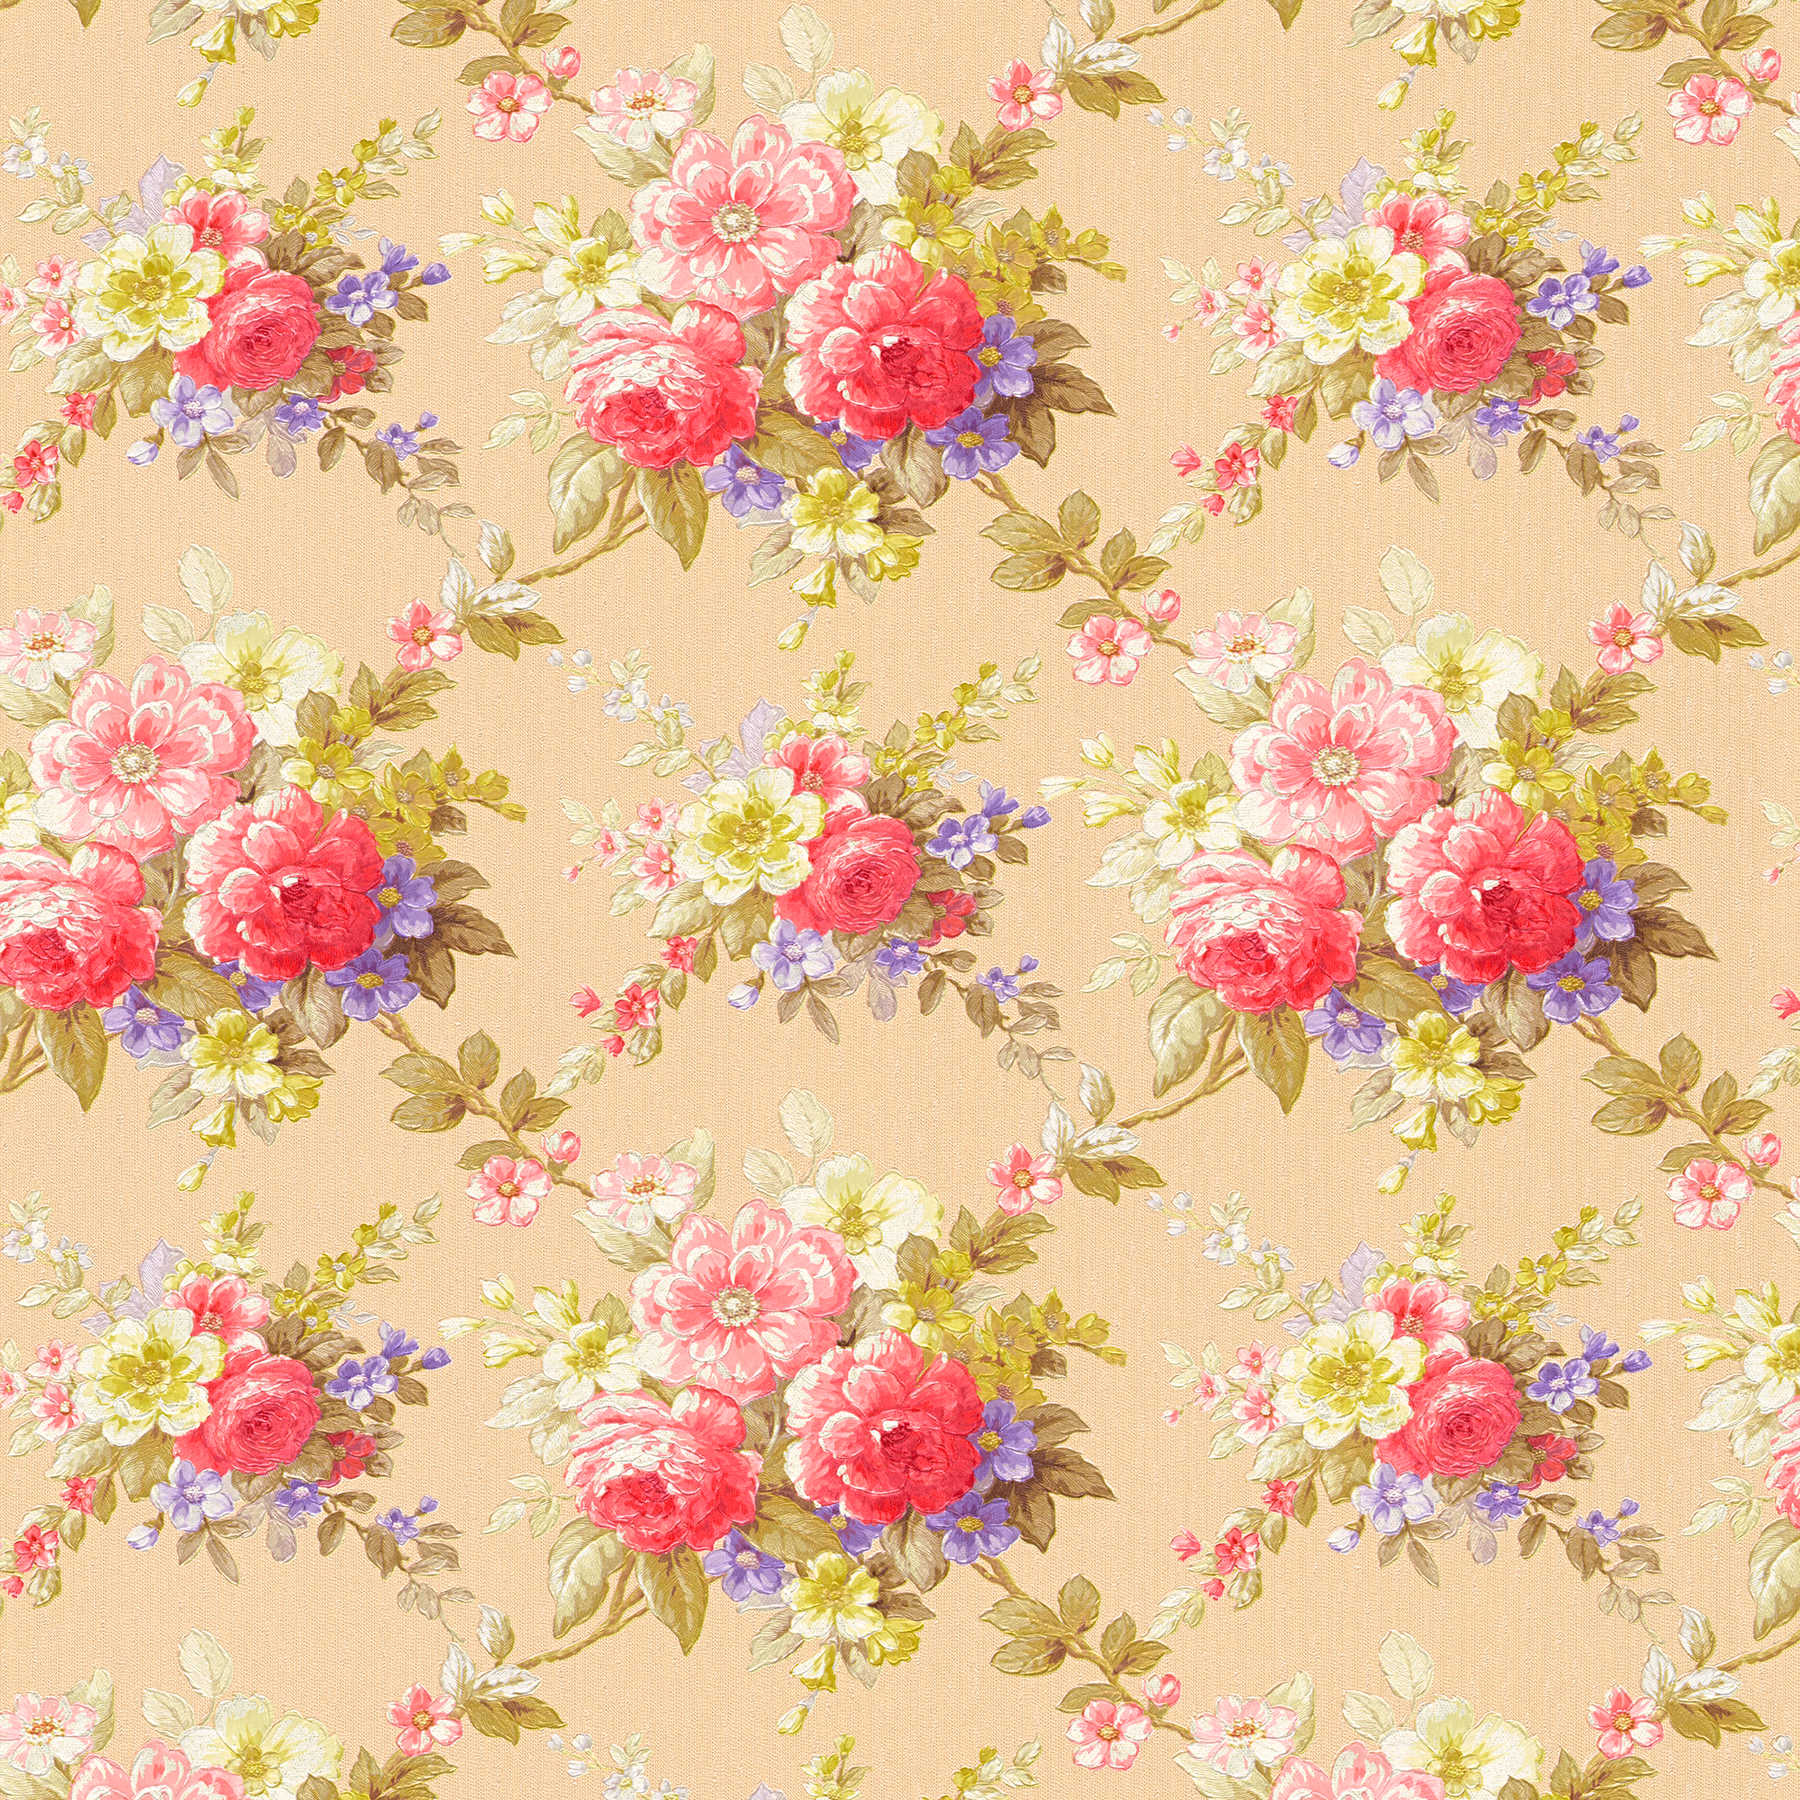         Wallpaper roses ornaments floral bouquet pattern - Colorful, Metallic
    